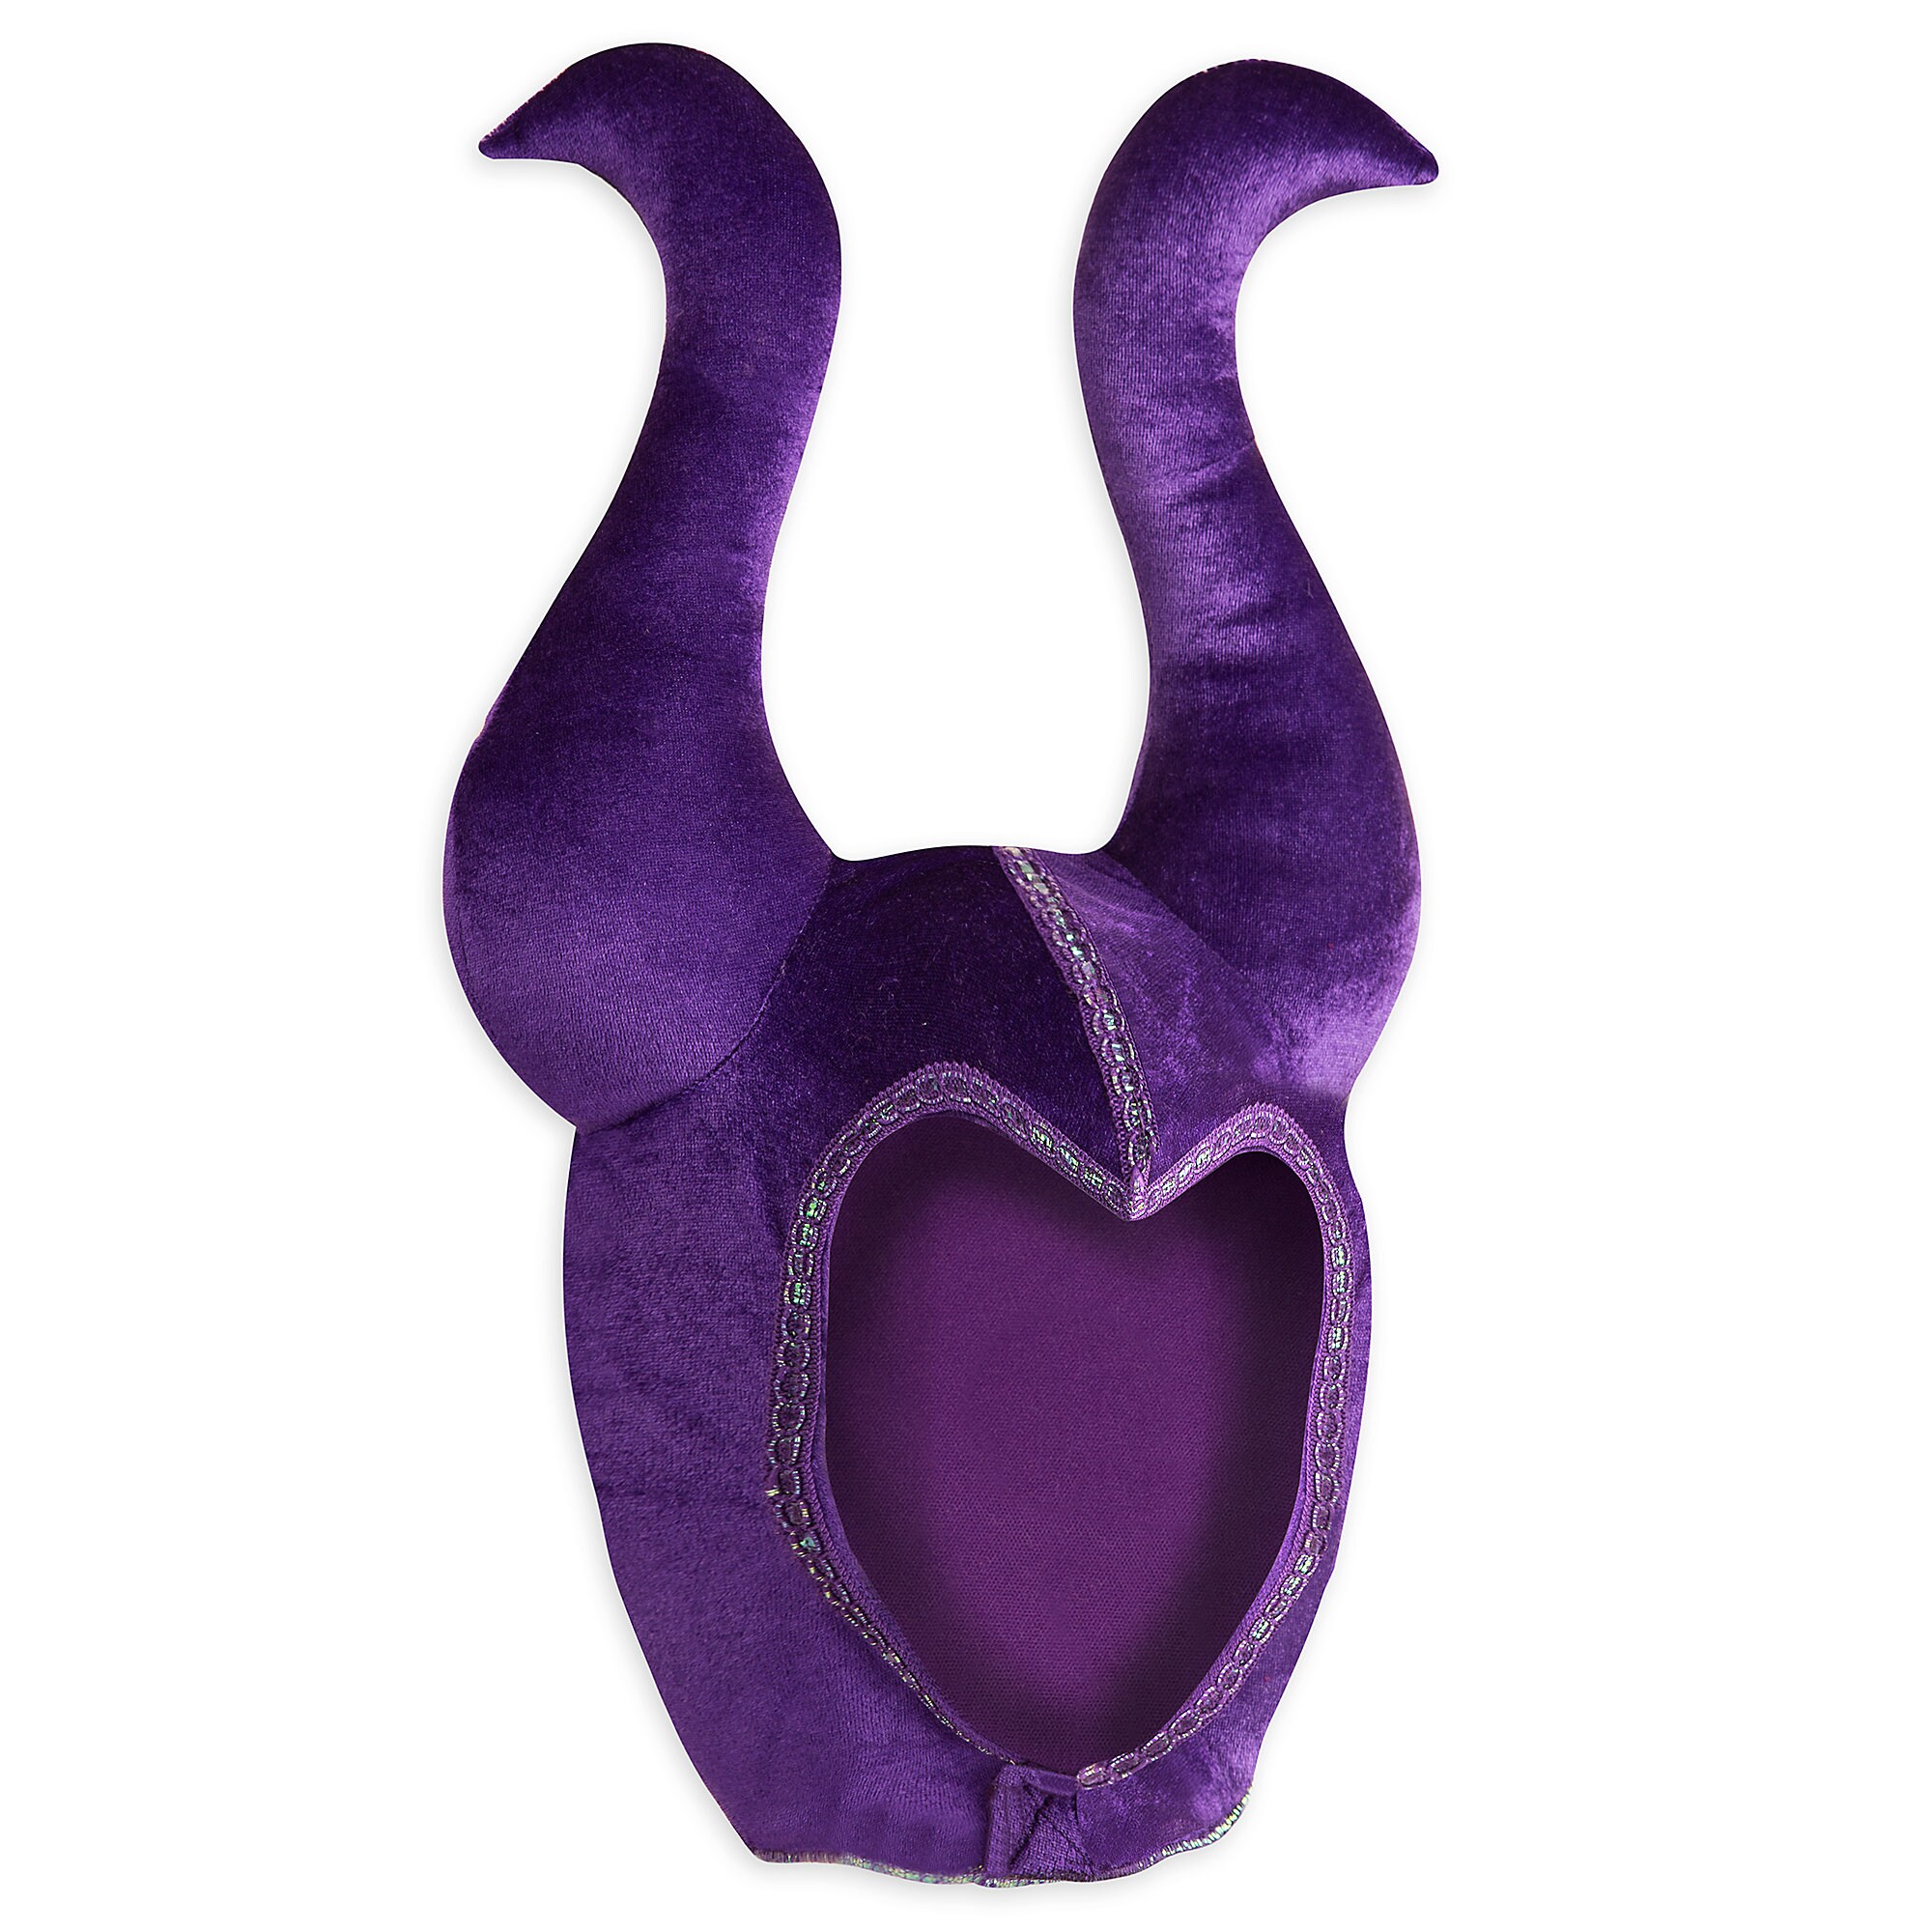 Maleficent Costume for Kids - Sleeping Beauty